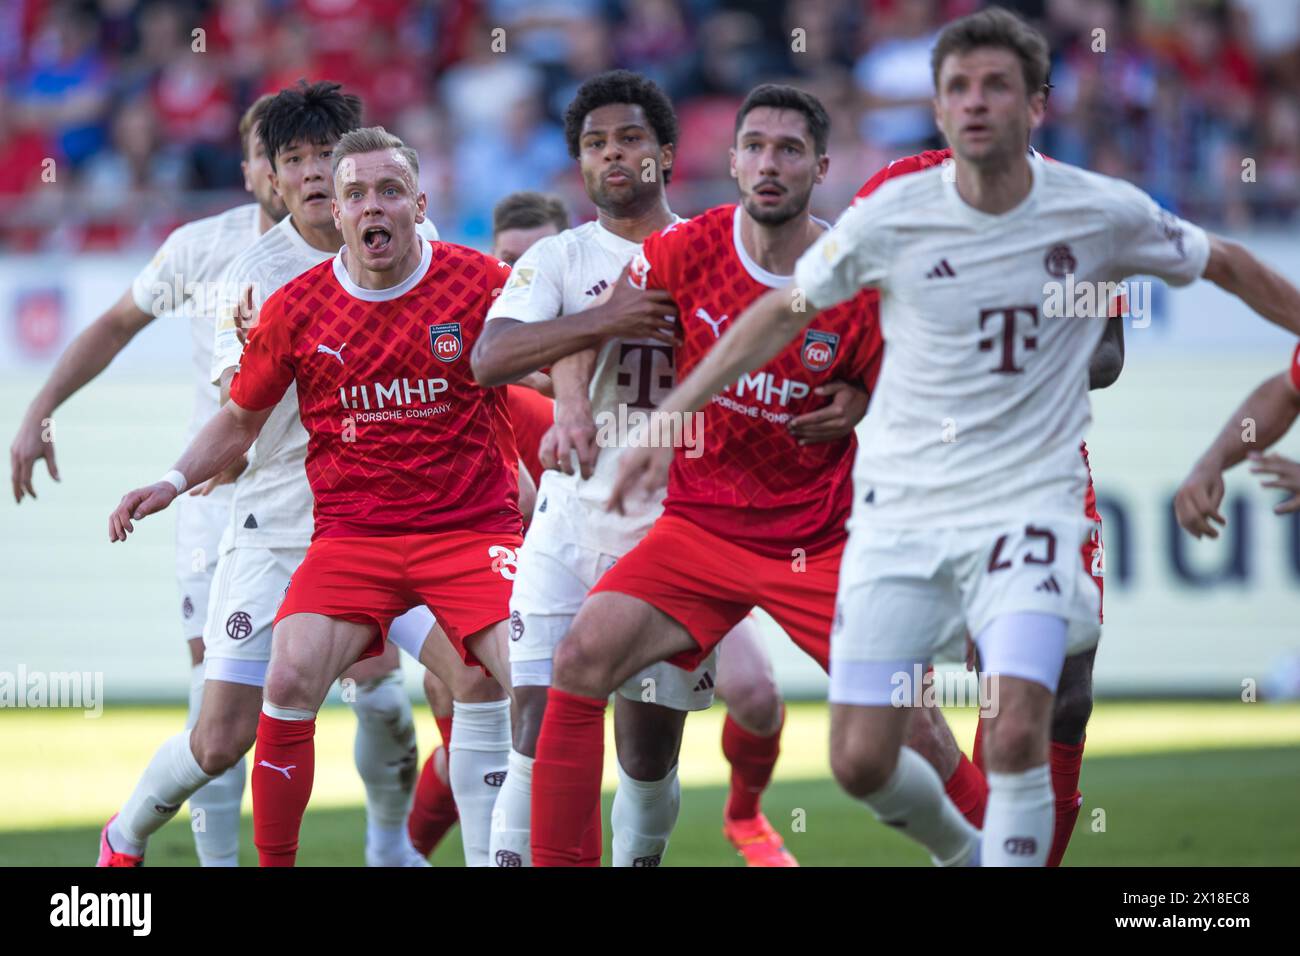 Football match, the players in the penalty area concentrating on the corner kick, from left to right Minjae KIM Bayern Munich, Lennard MALONEY 1.FC Stock Photo